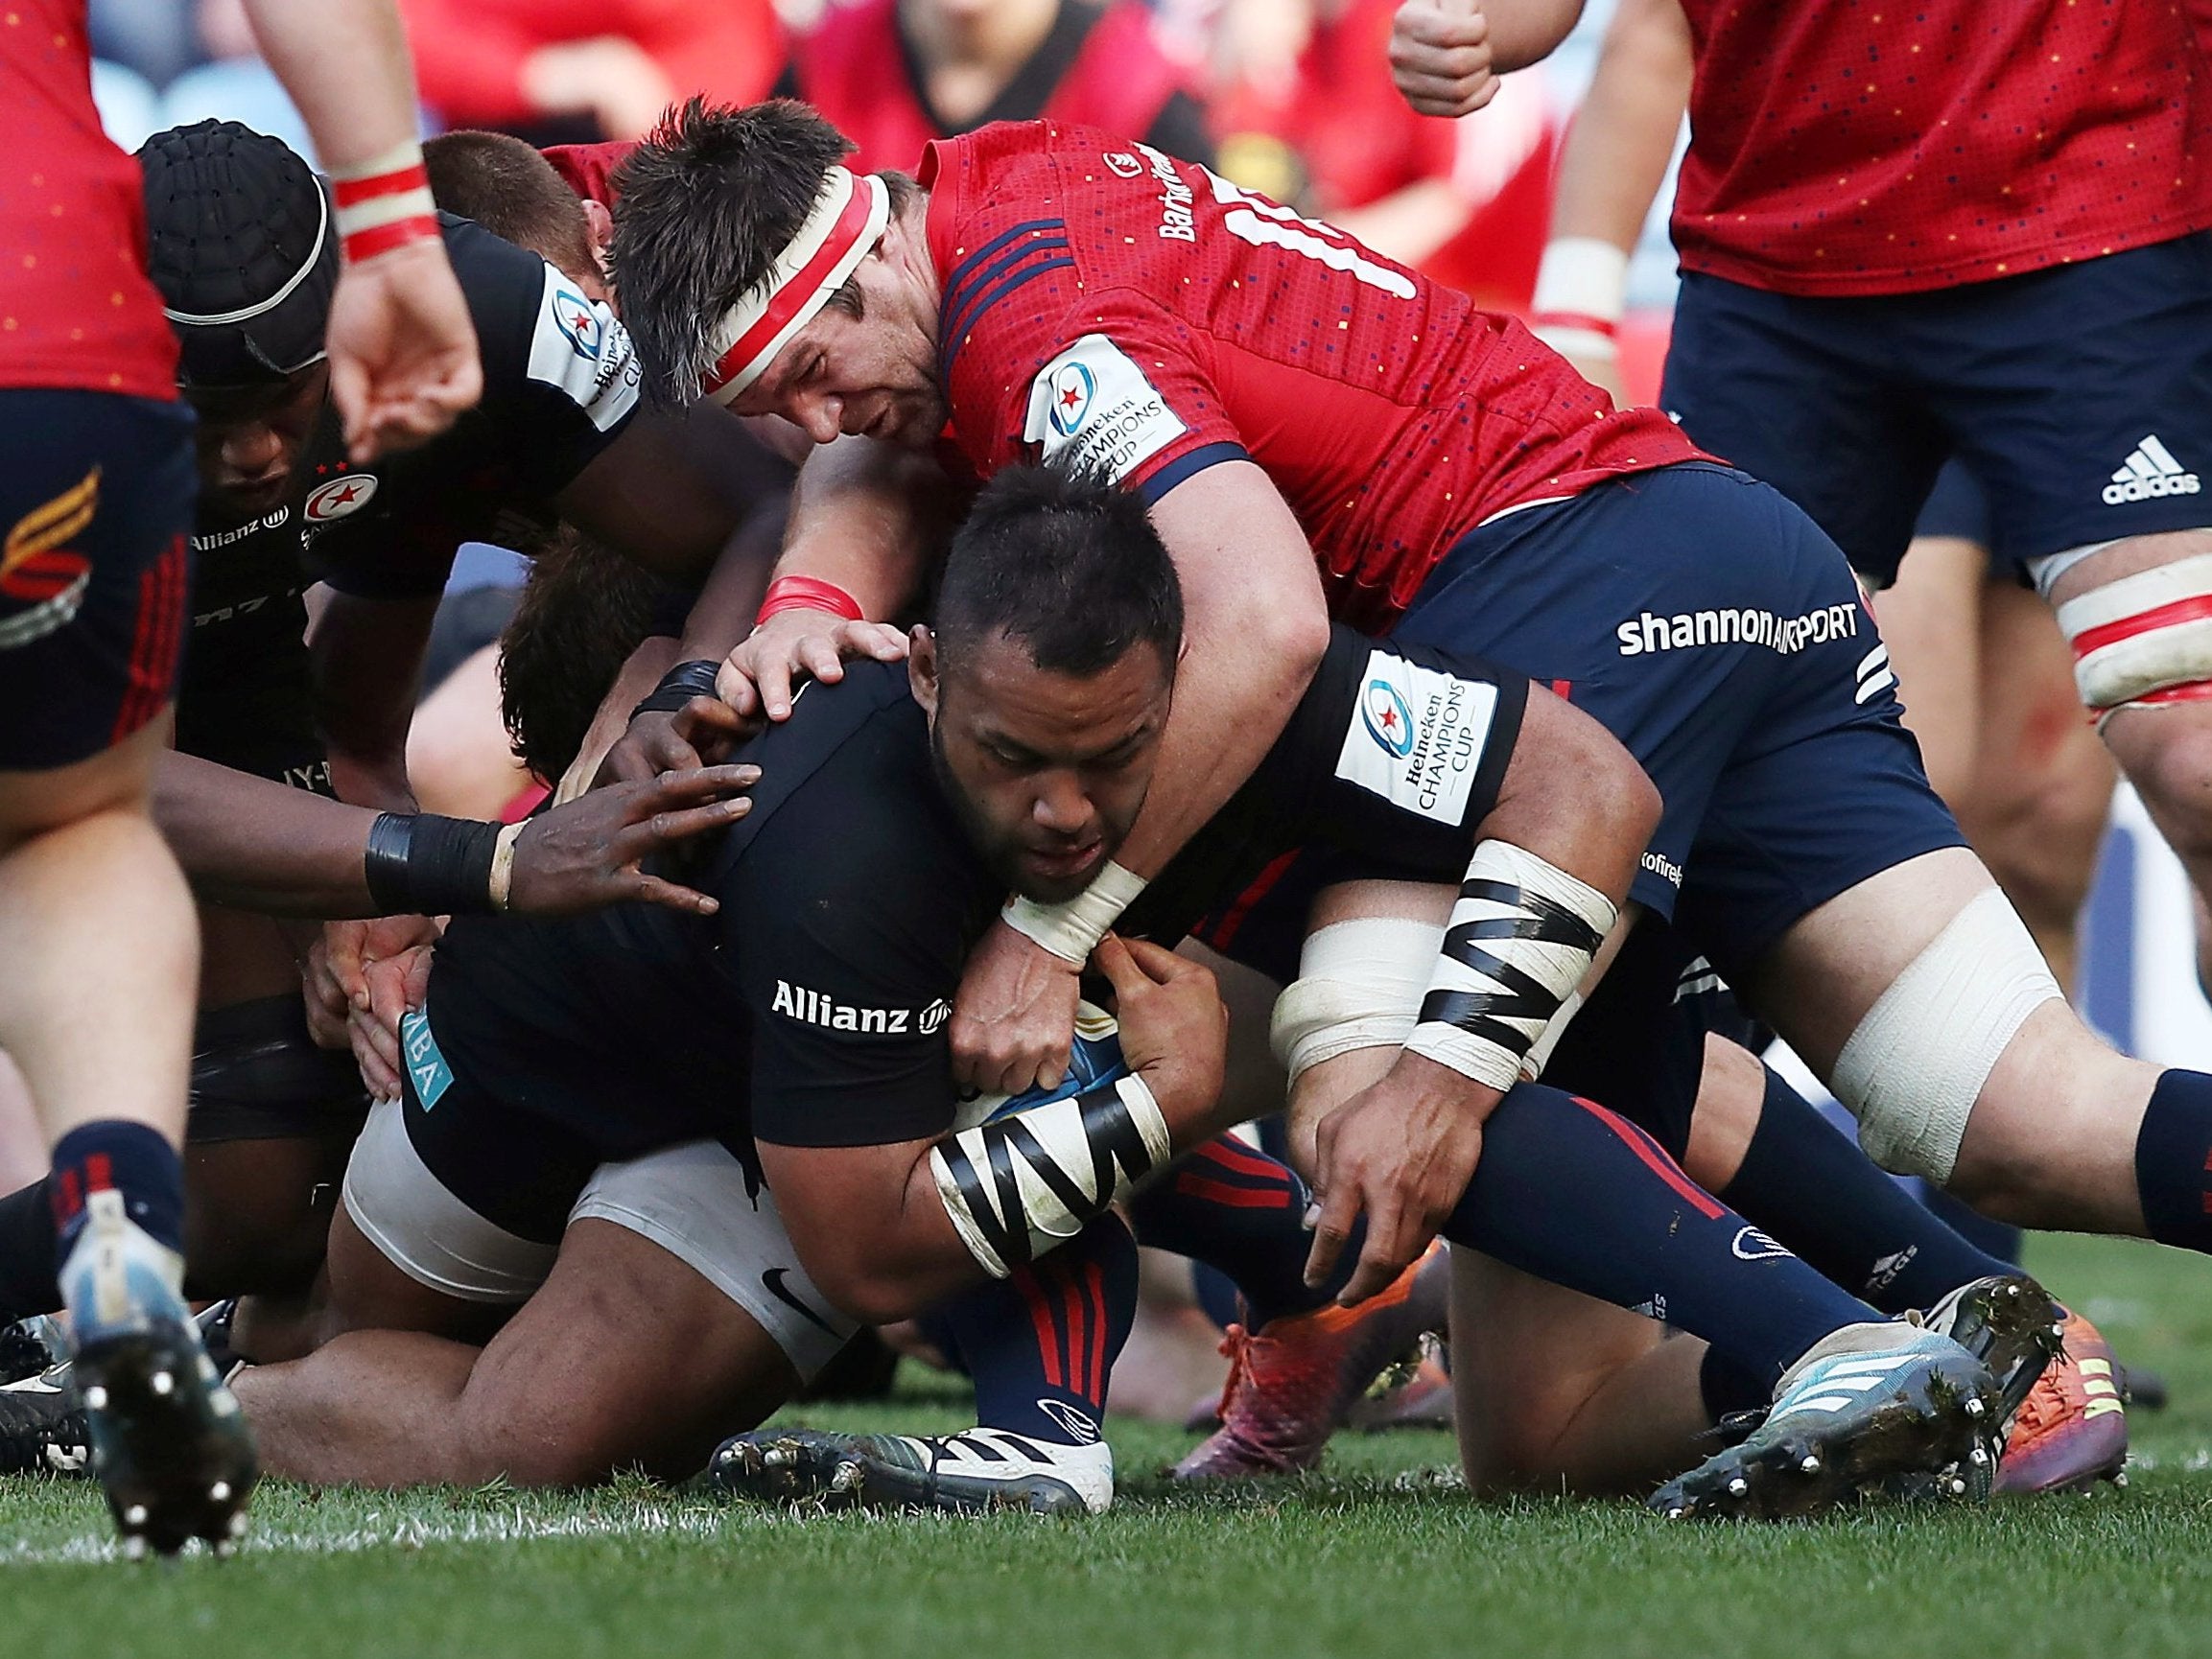 Billy Vunipola scored Saracens' second try to secure victory over Munster